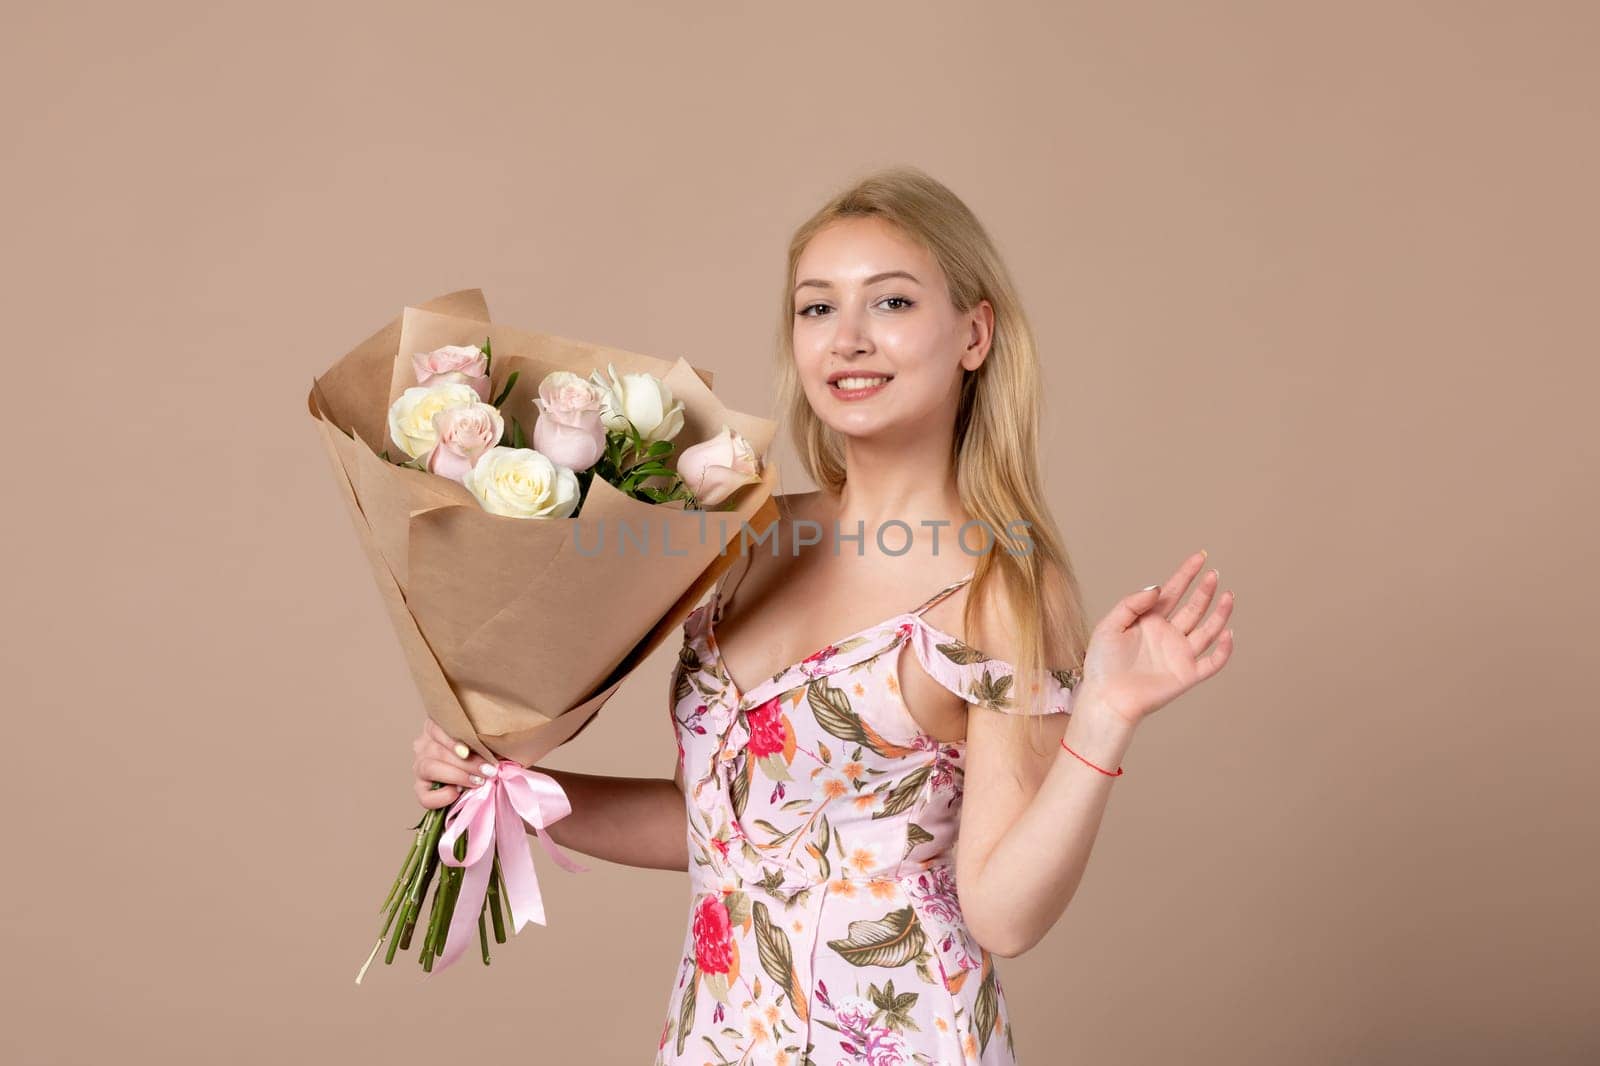 front view young female posing with bouquet of beautiful roses on brown background feminine sensual woman horizontal march marriage equality